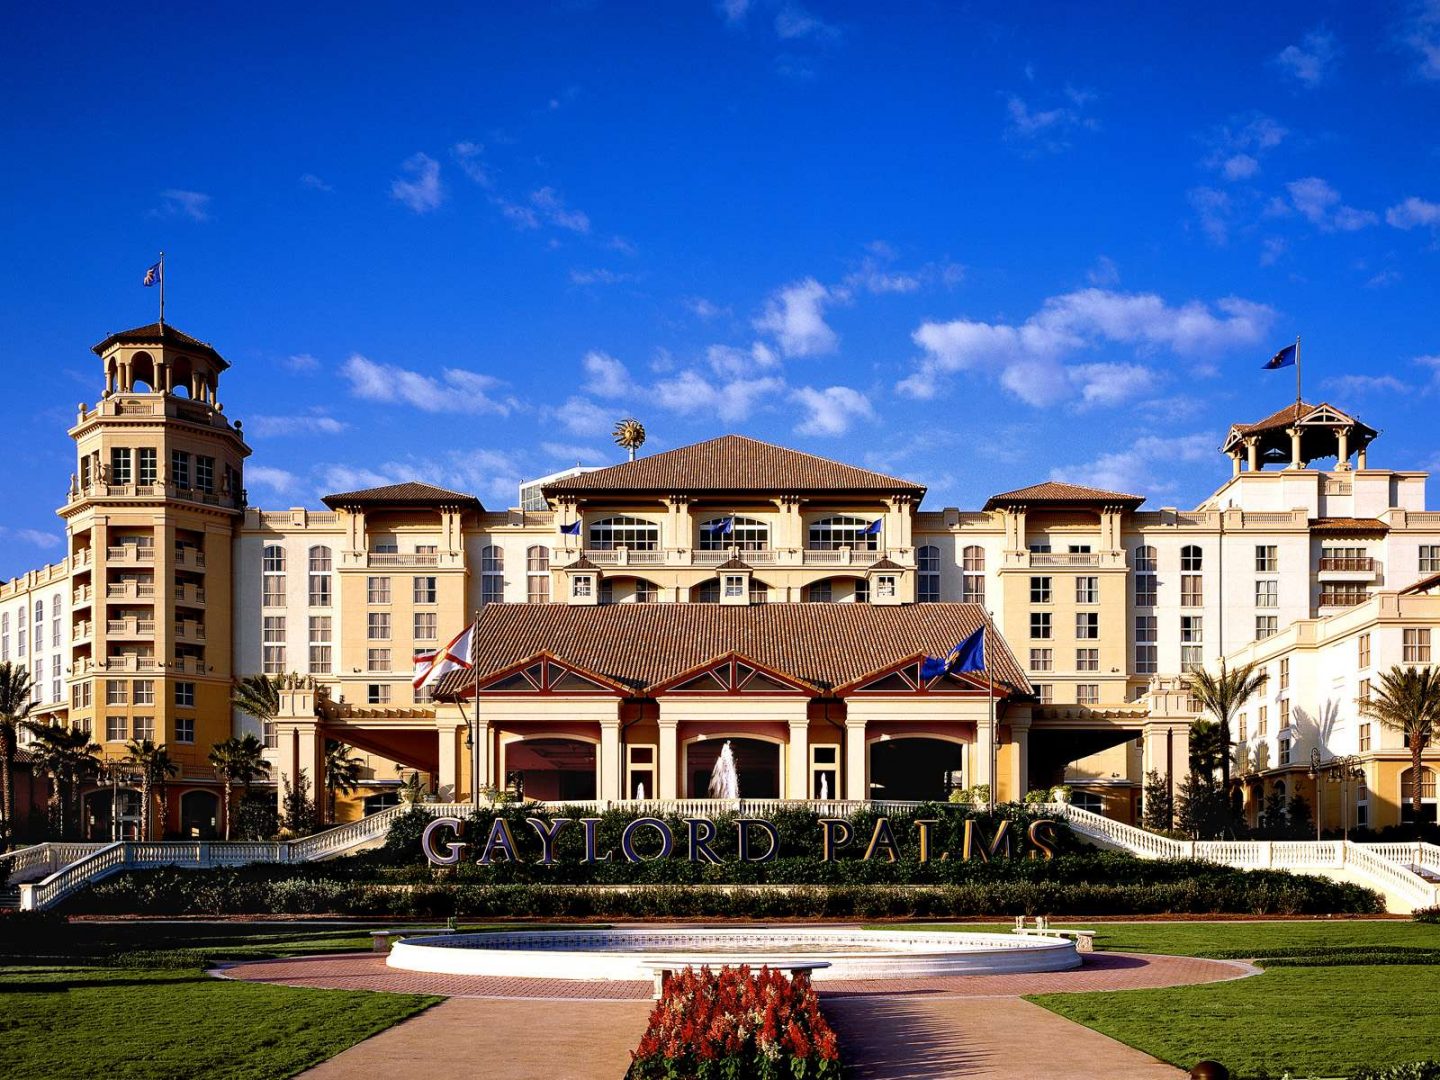 gaylord palms orlando resort located in kissimmee, florida